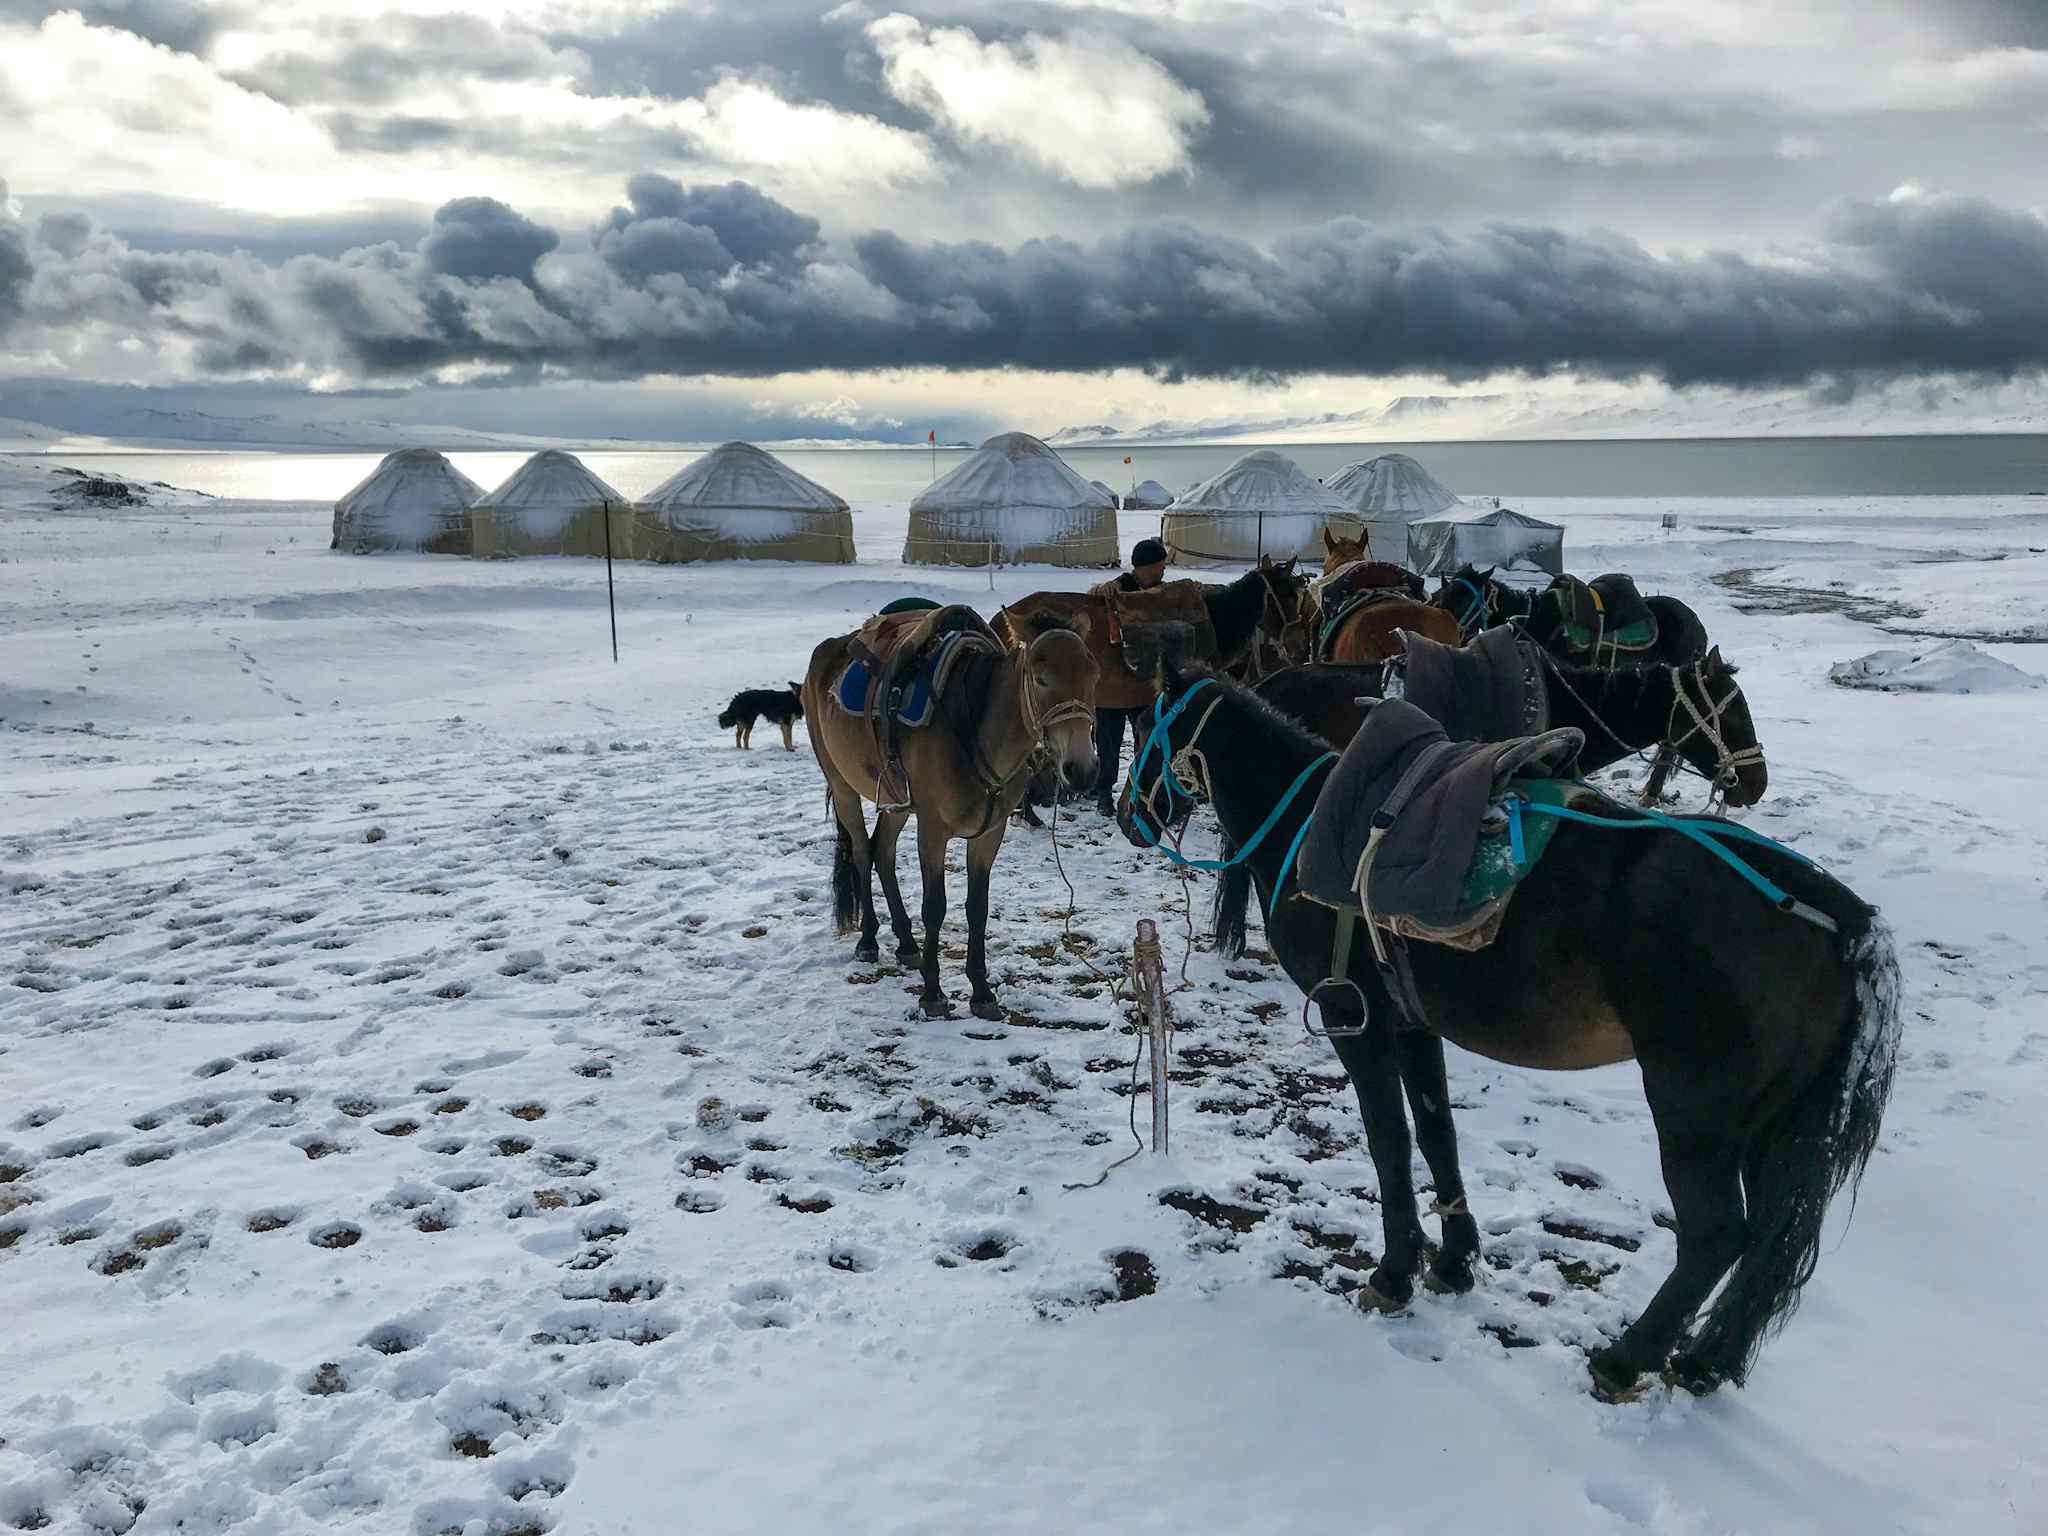 Horses standing in front of a yurt camp in the winter snow, Kyrgyzstan